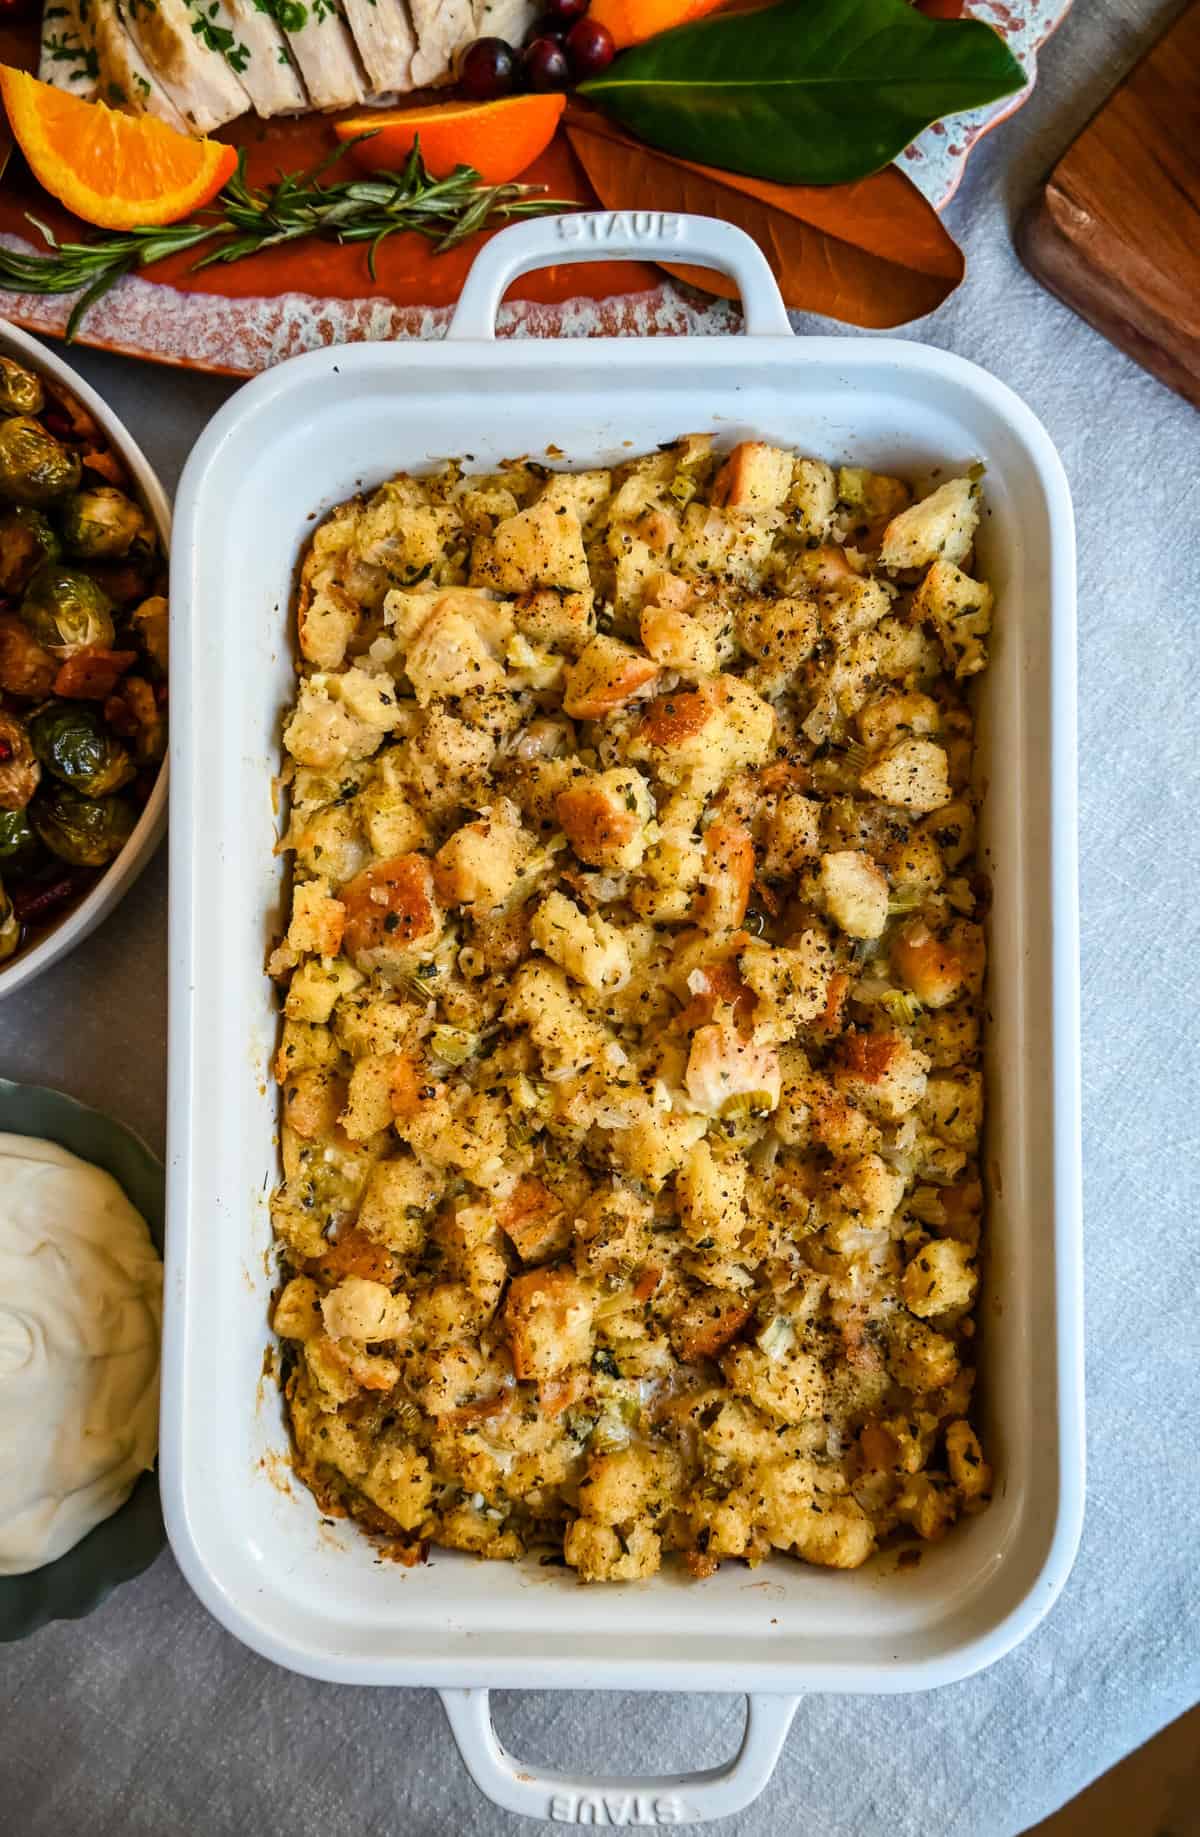 Classic Butter Herb Stuffing. How to make a foolproof, perfect, classic stuffing recipe with simple ingredients. This easy stuffing recipe is always a hit at Thanksgiving!